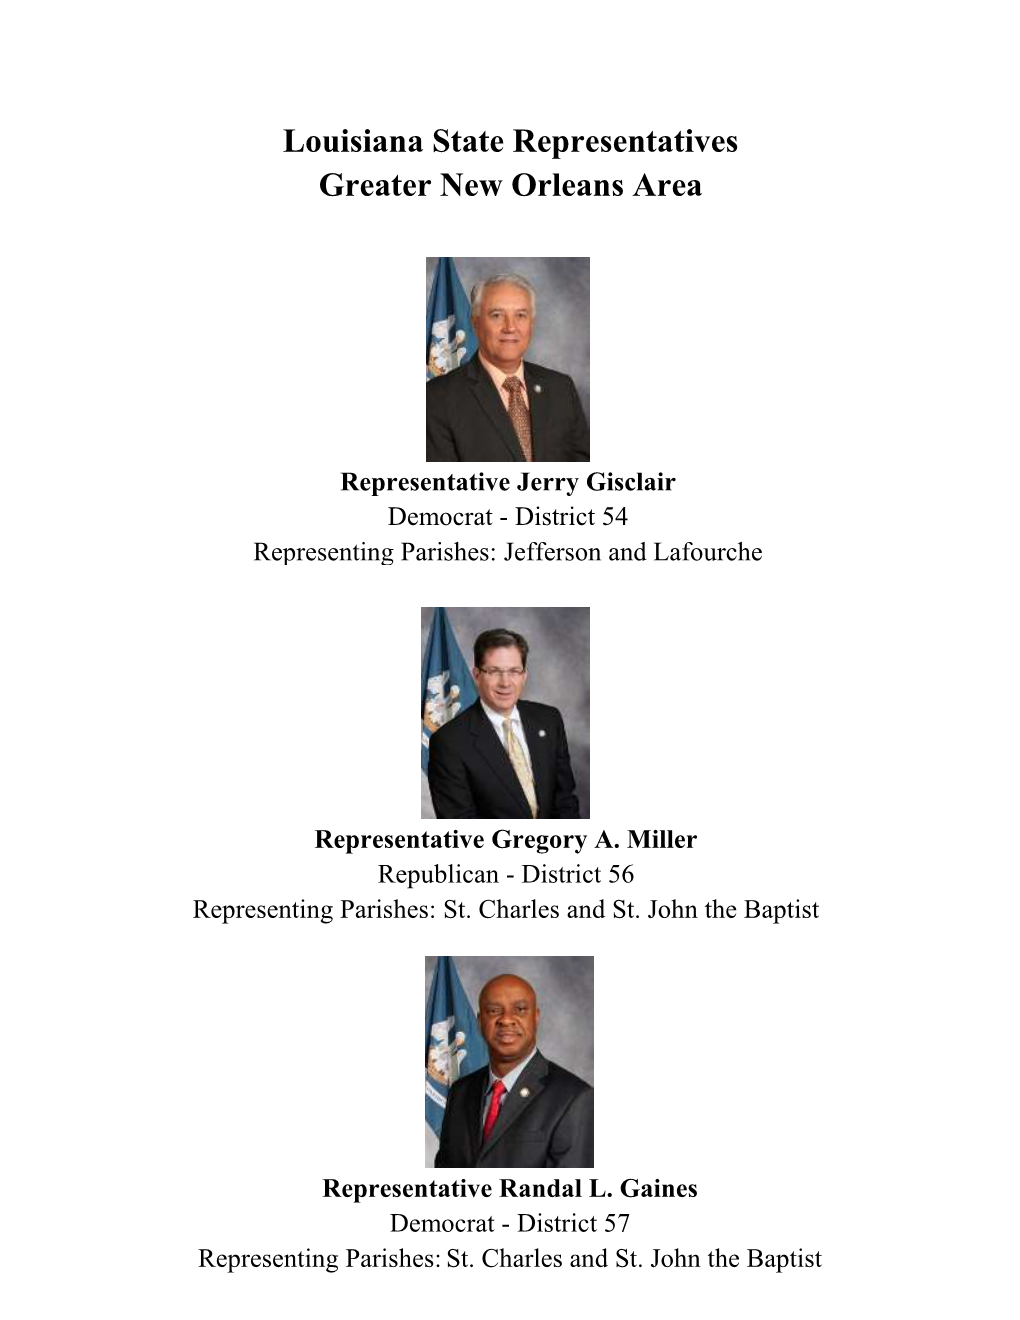 Louisiana State Representatives Greater New Orleans Area